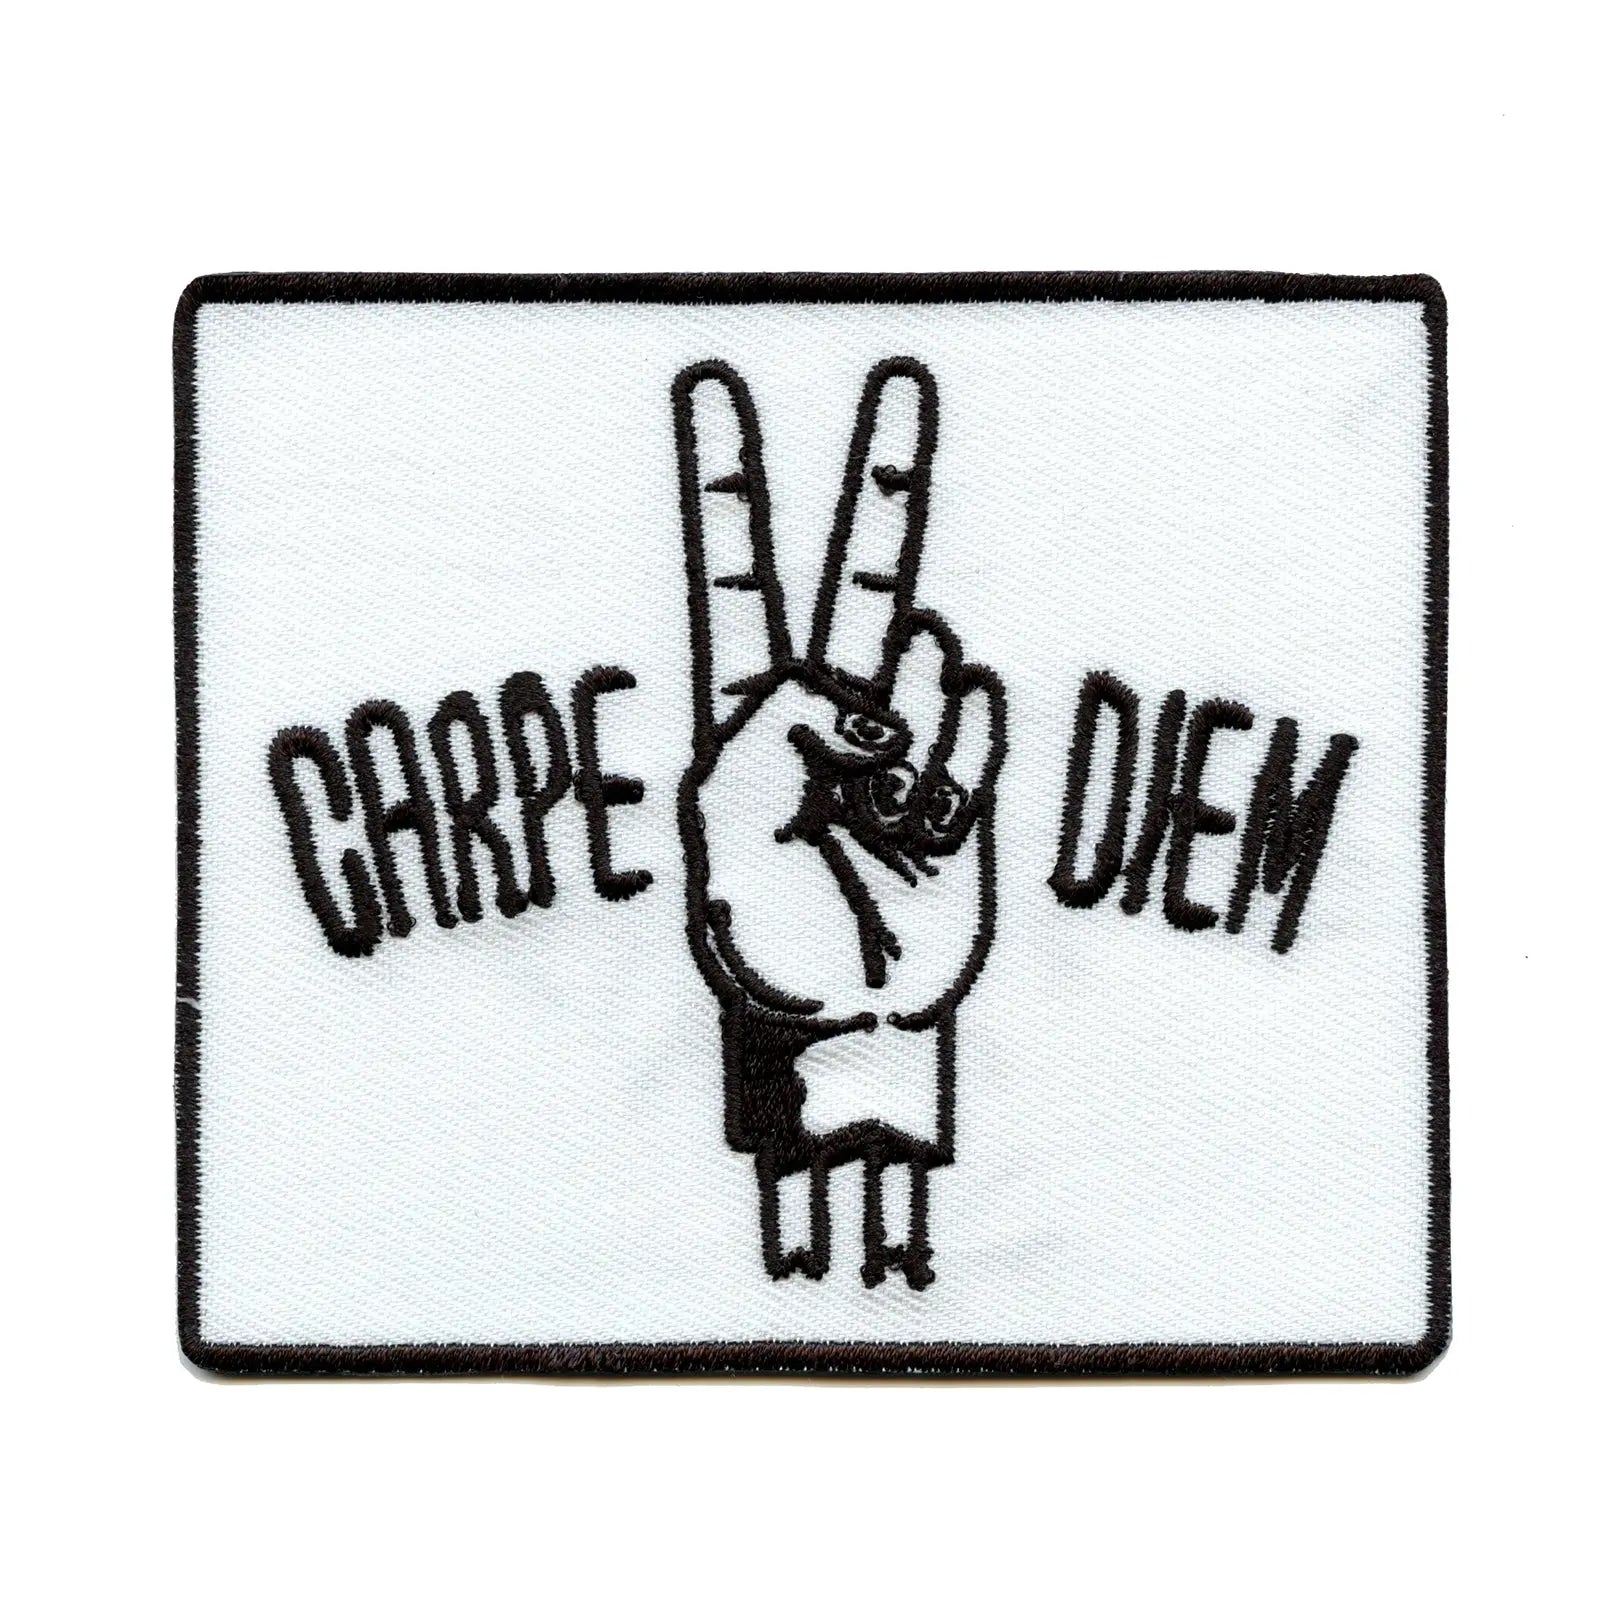 Carpe Diem "Seize The Day" Embroidered Iron-on Patch 